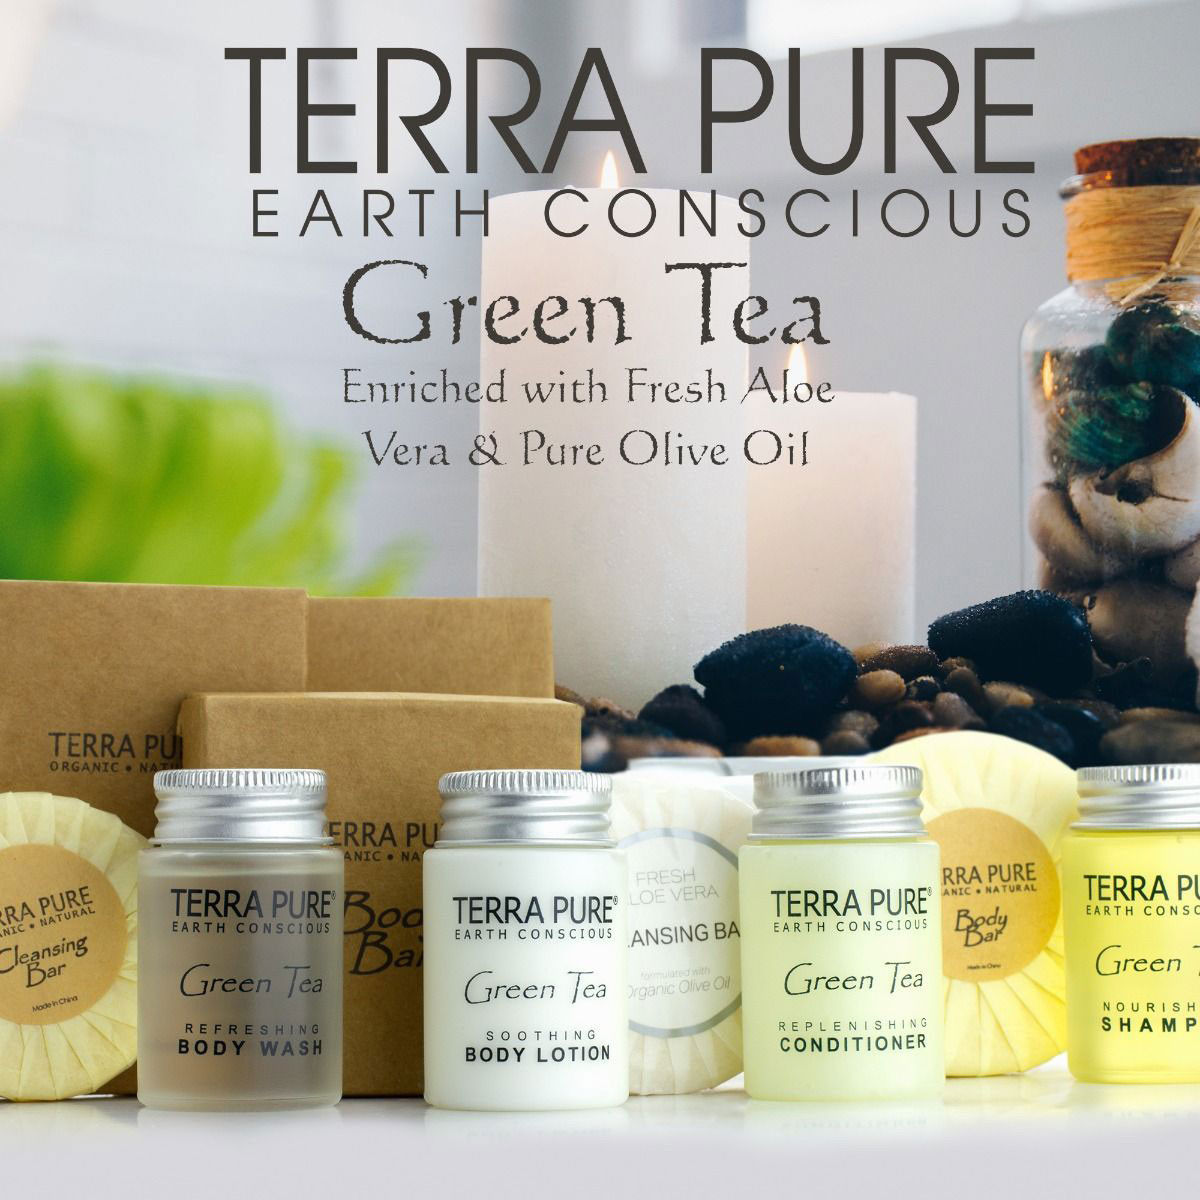 How is the TERRA PURE GREEN TEA Collection packaged with terra pure?